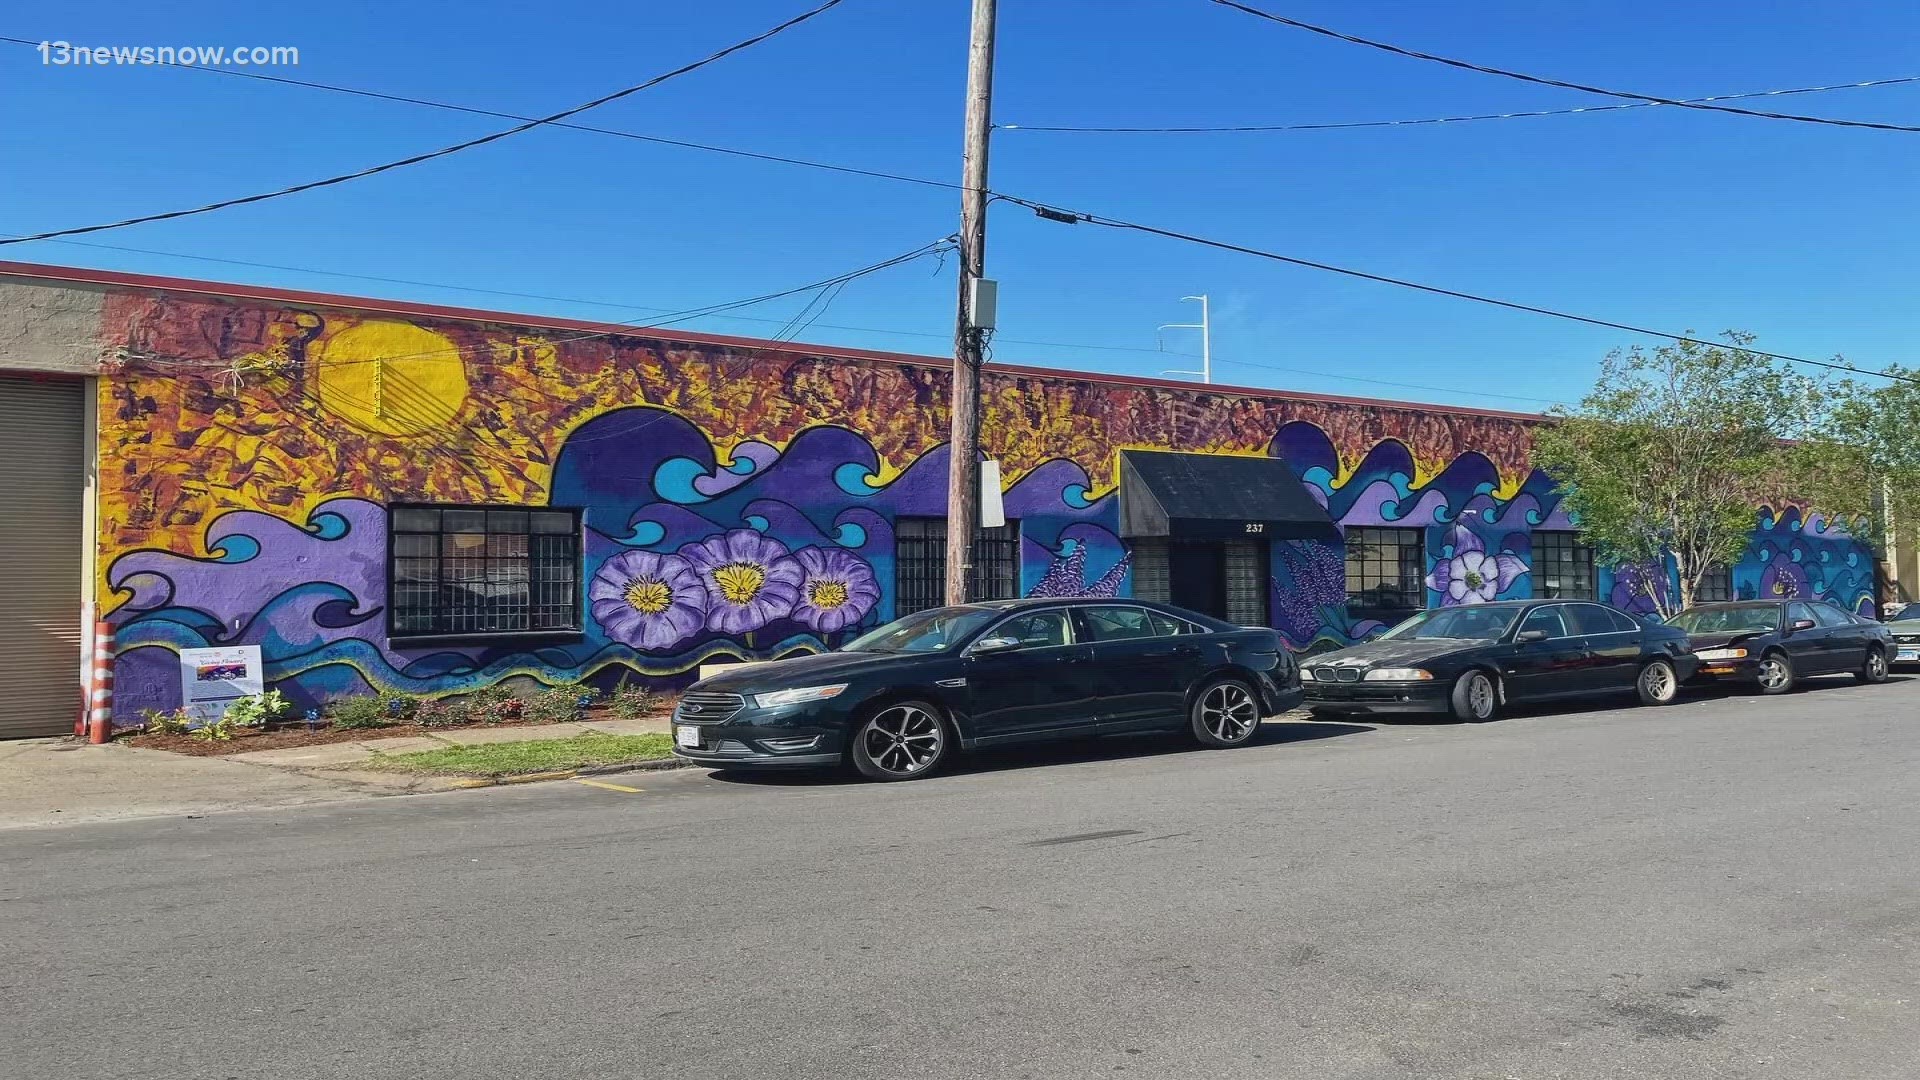 It’s a young and up-and-coming mix of restaurants, breweries, and creative spaces near the historic Park Place neighborhood.